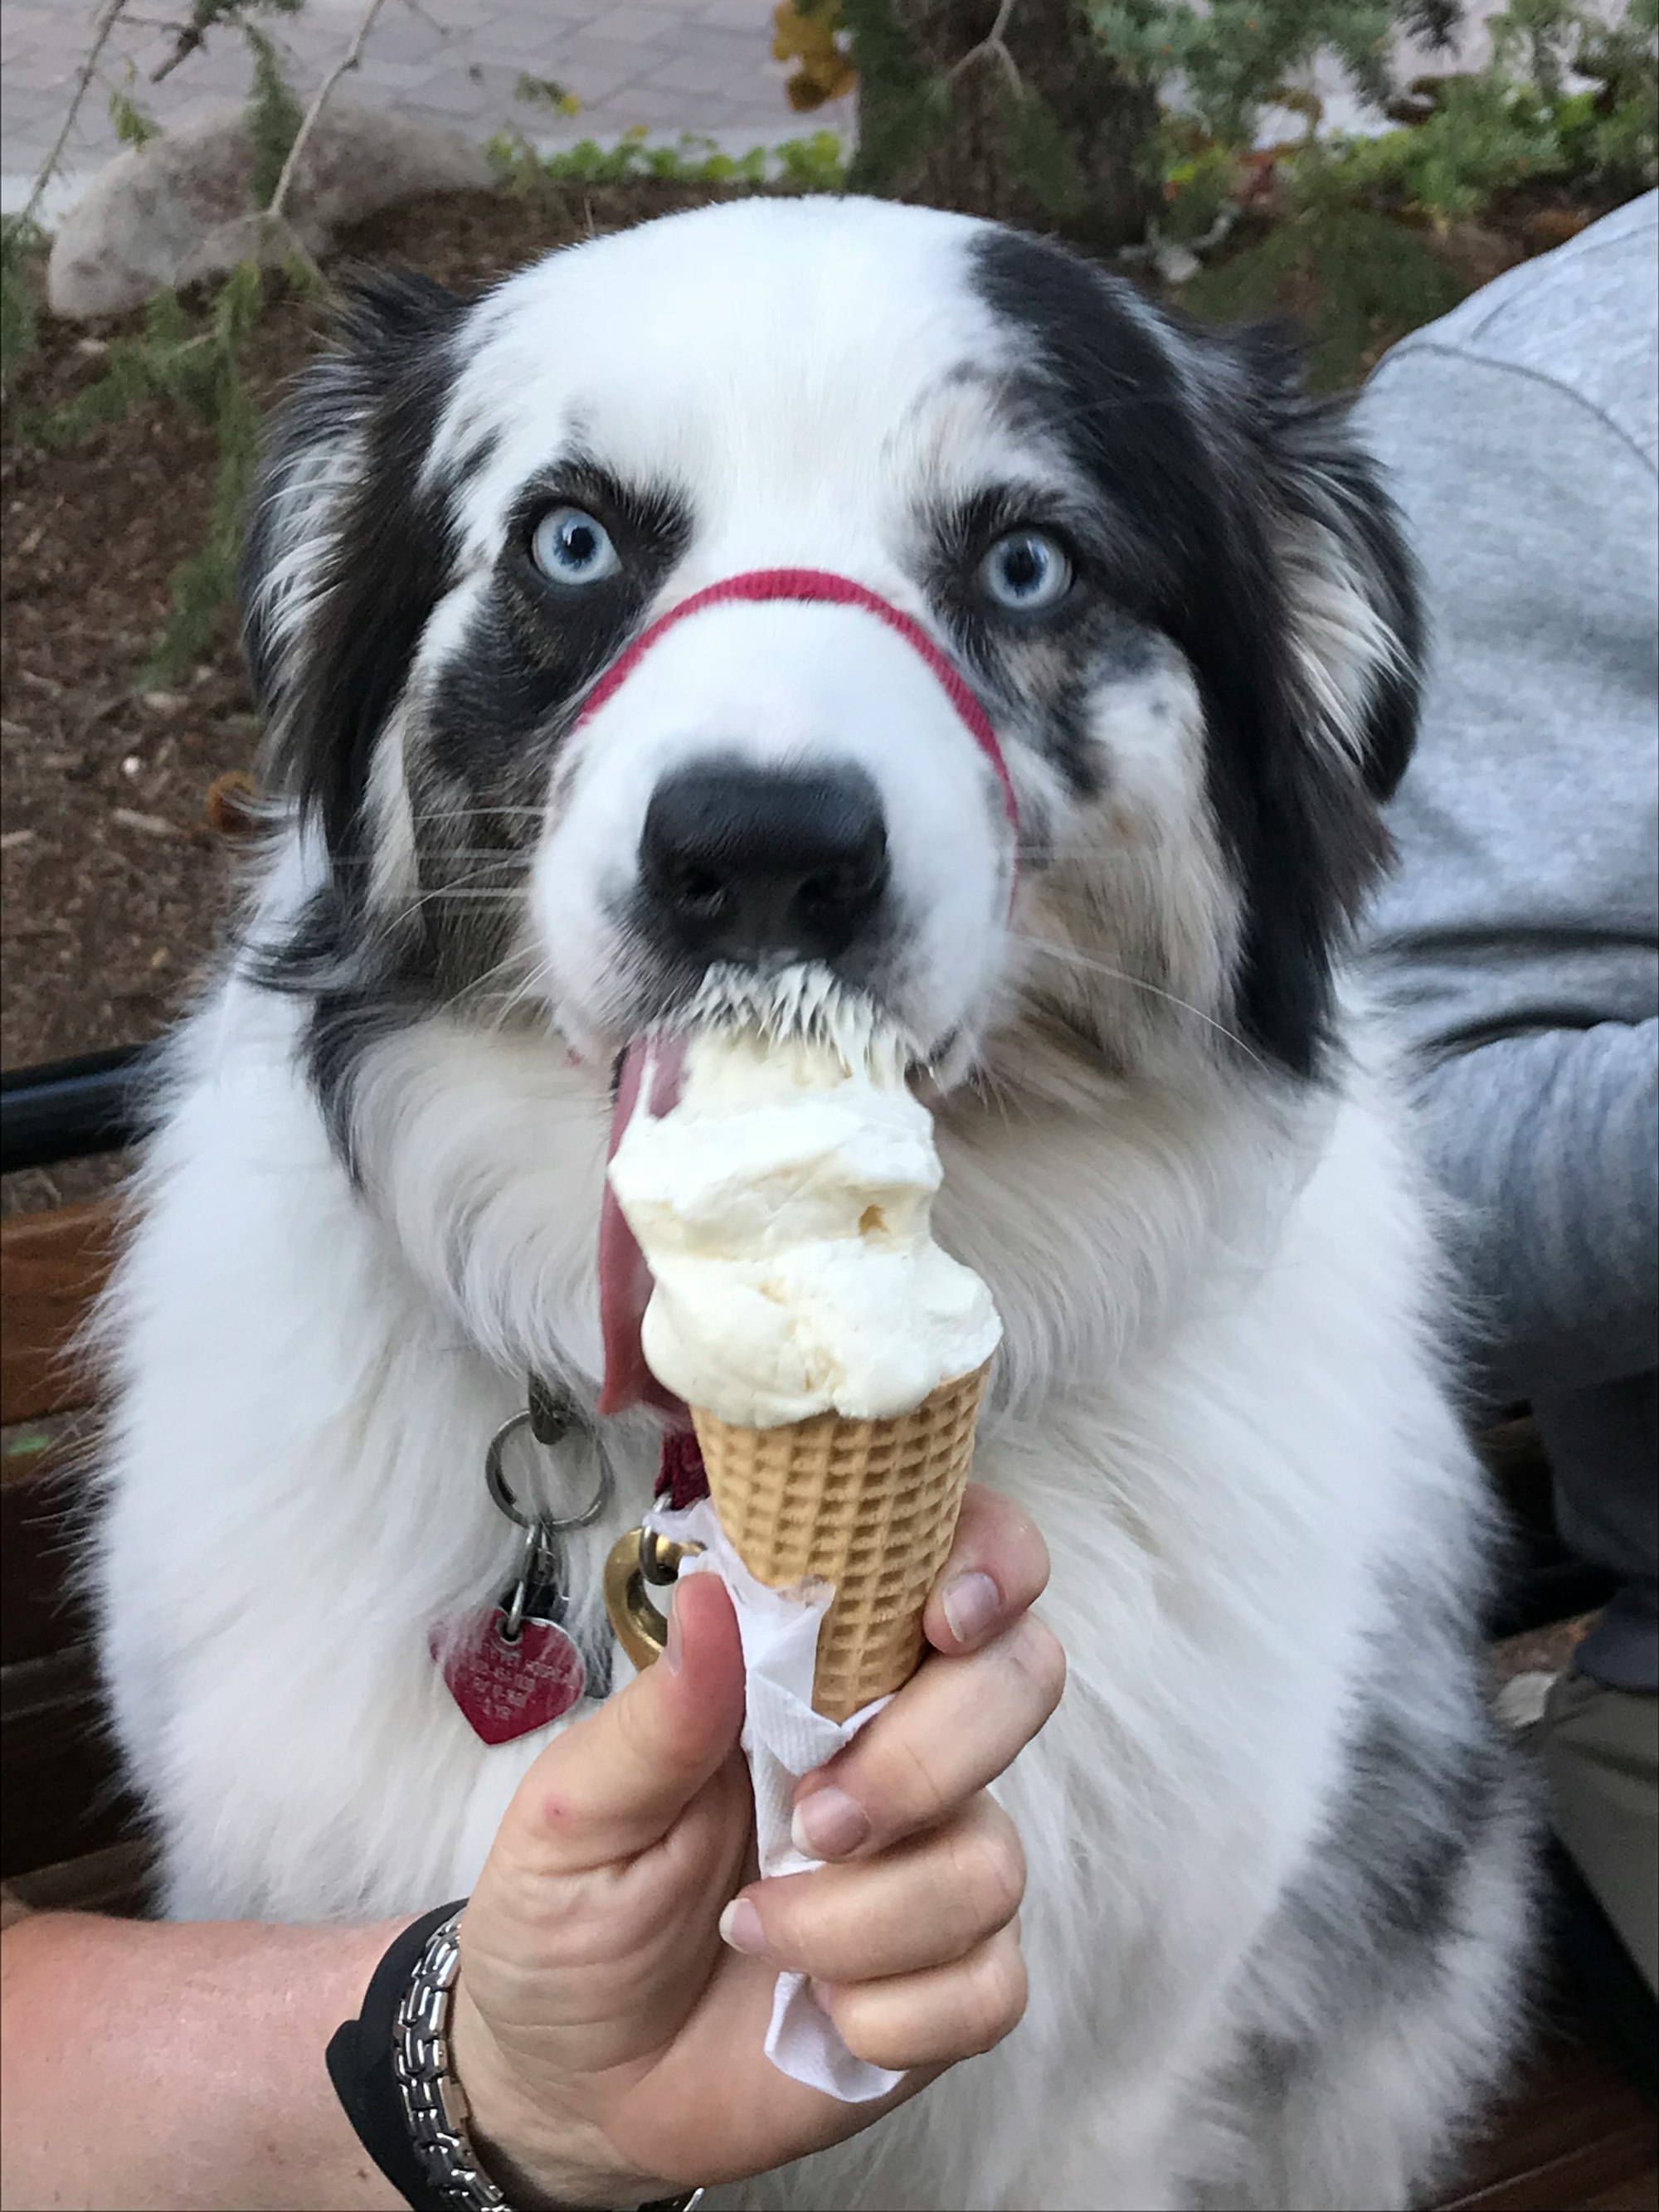 a black and white dog eating an ice cream cone